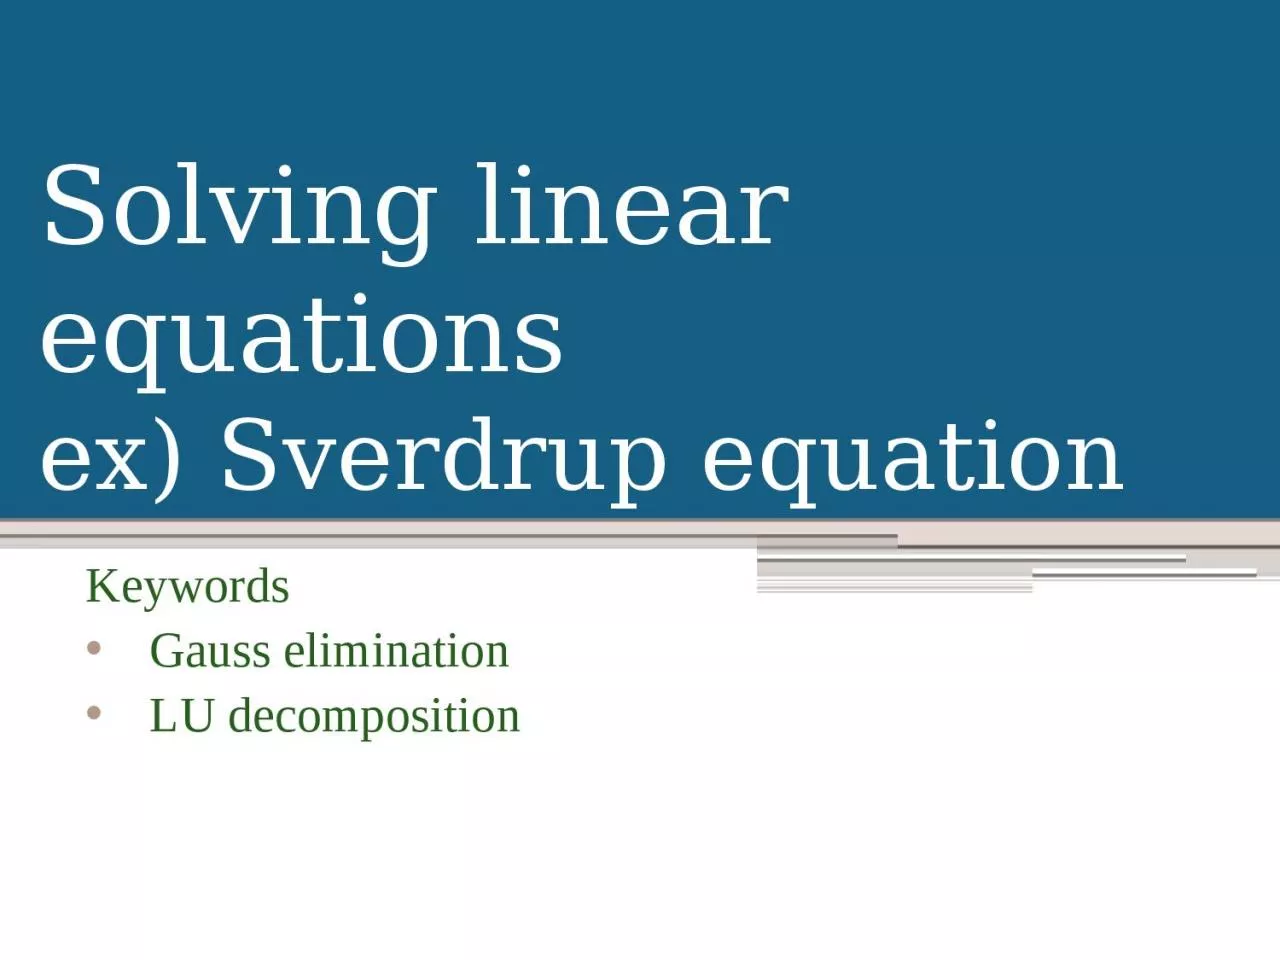 Solving linear equations